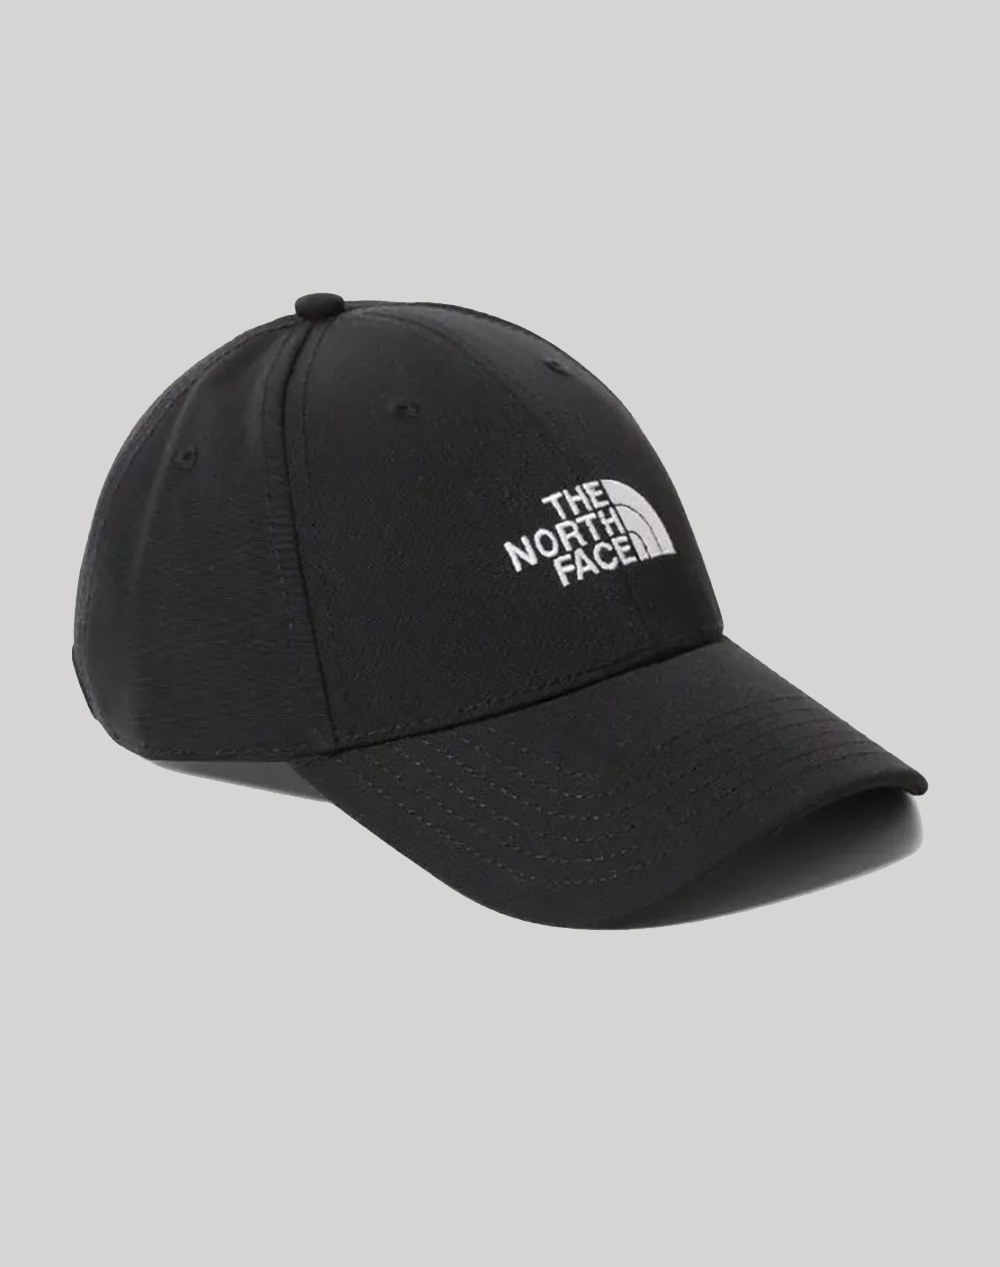 THE NORTH FACE RECYCLED 66 CLASSIC HAT NF0A4VSV-NFKY4 Black 3800ATHFA5500001_XR28867